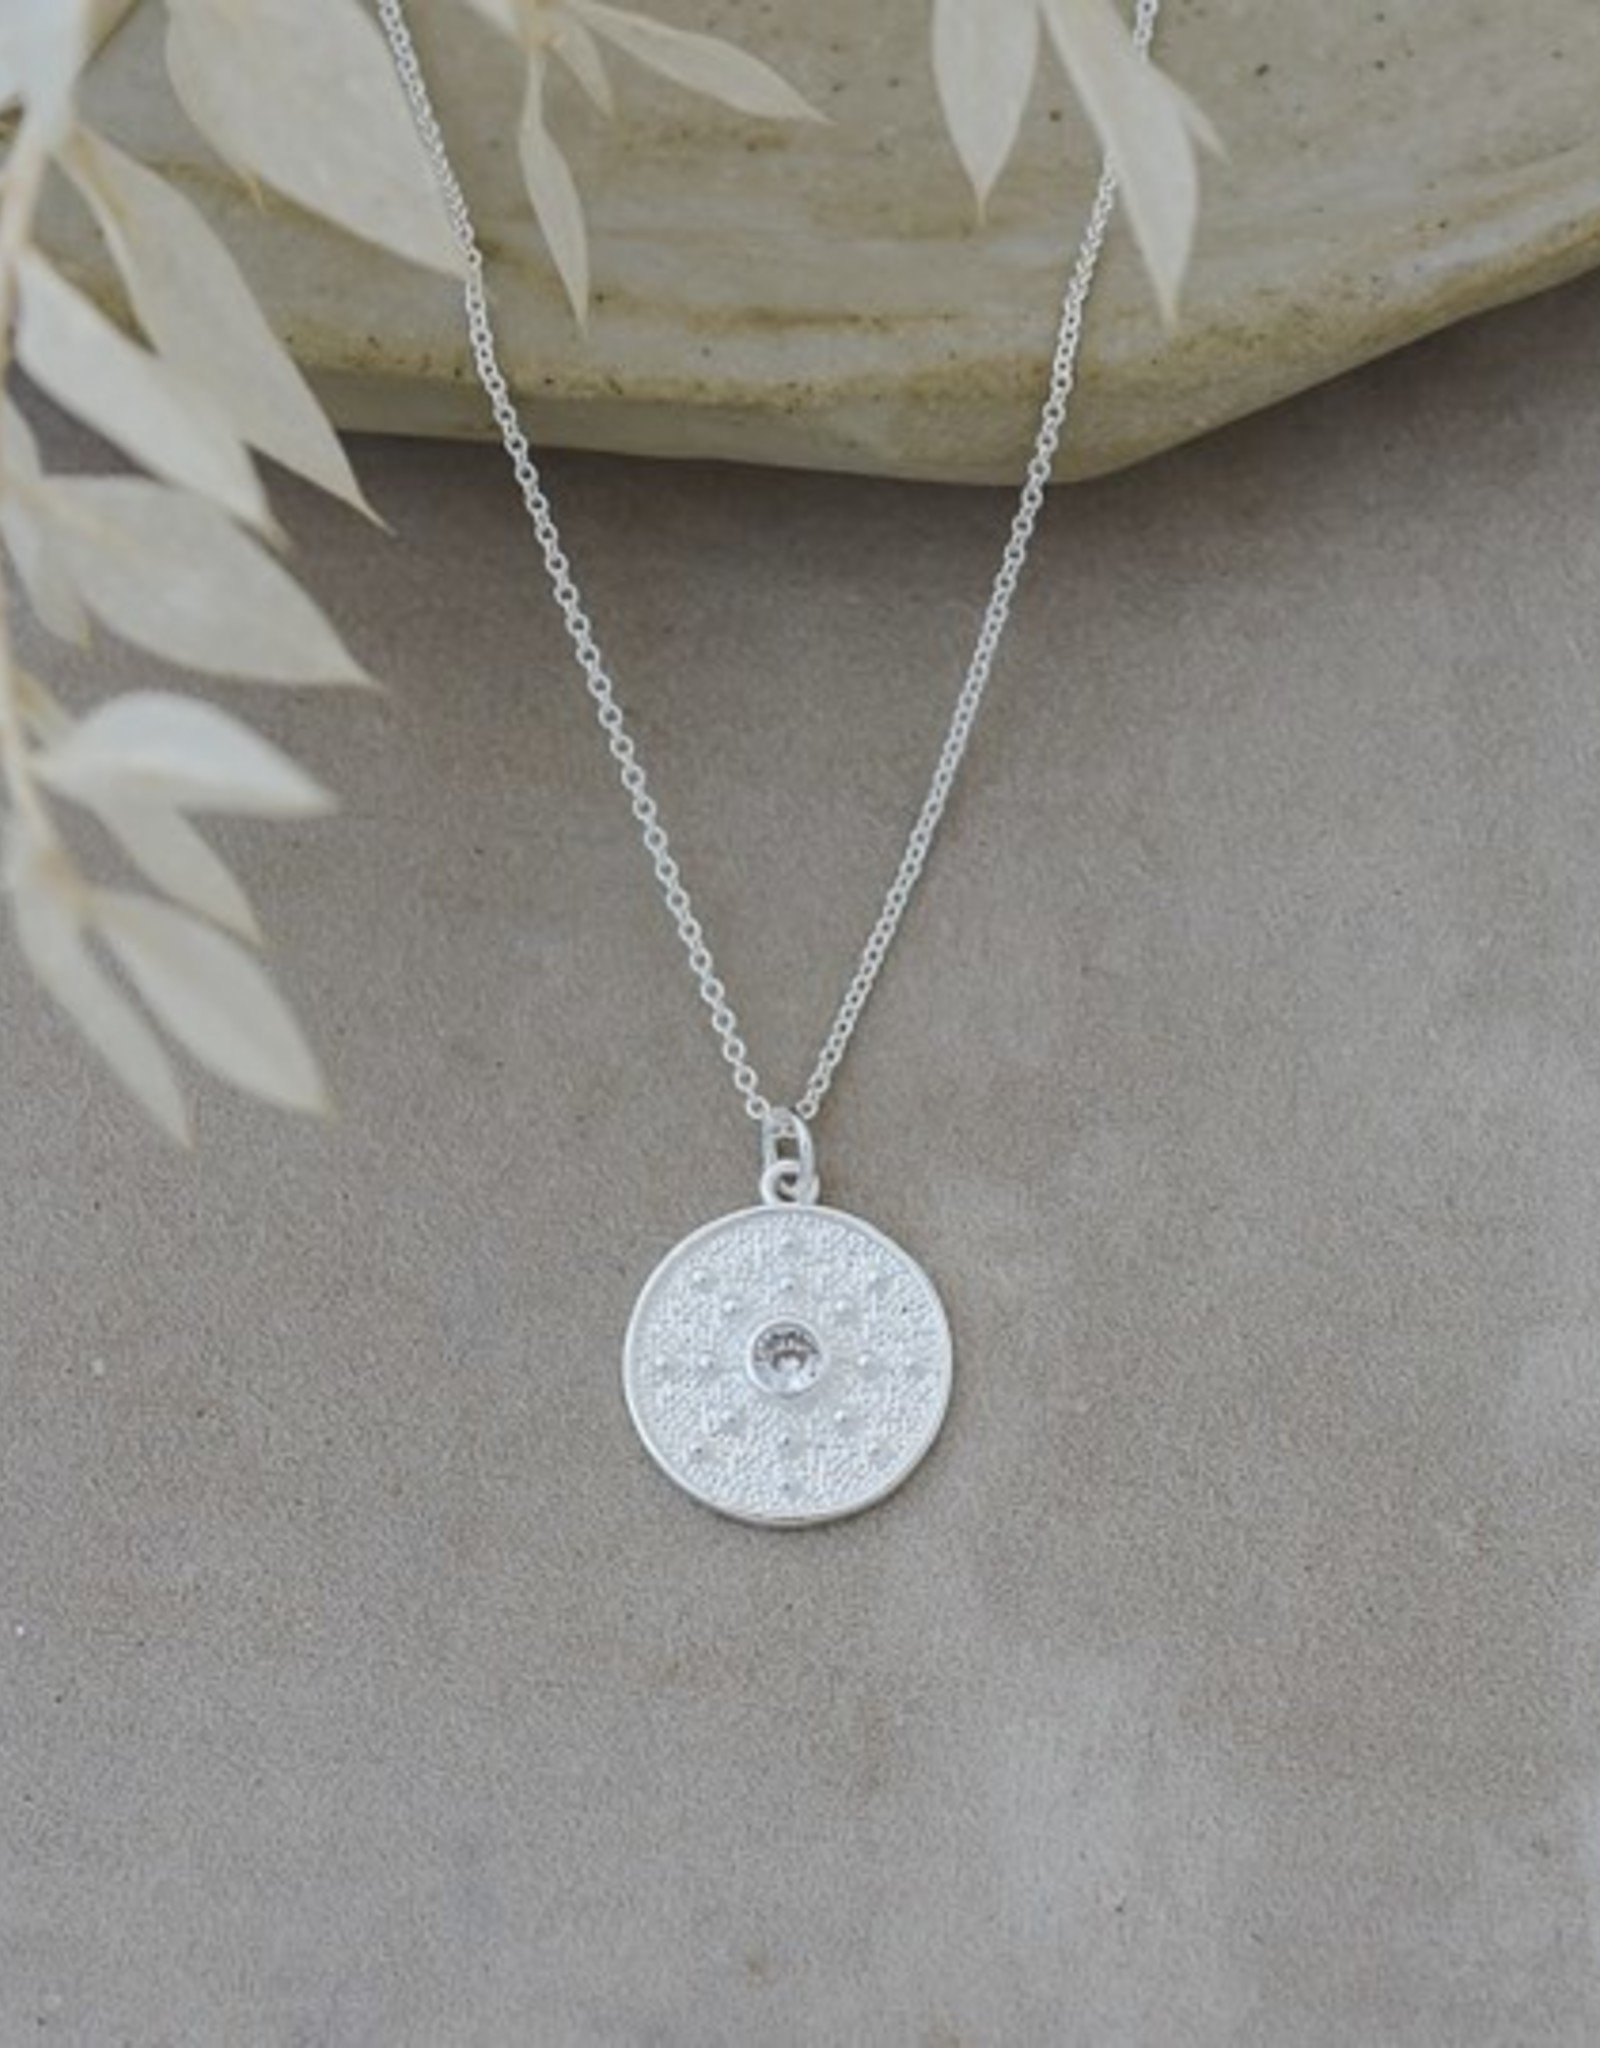 Lone Medallion Necklace - Silver